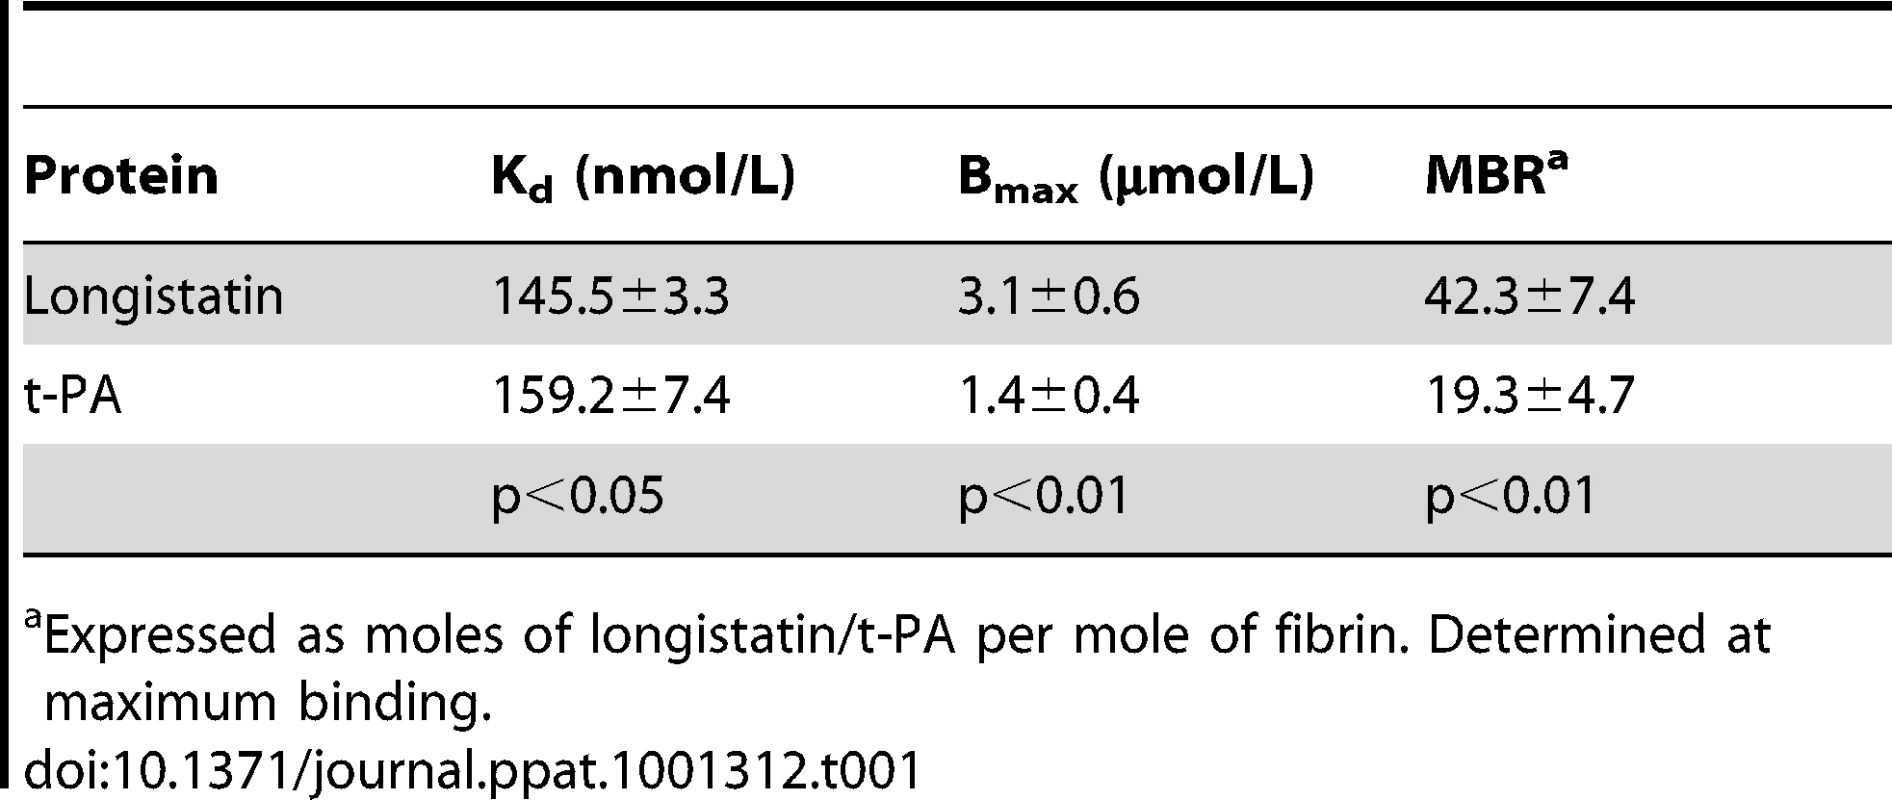 Comparison of fibrin-binding parameters of longistatin with those of t-PA.